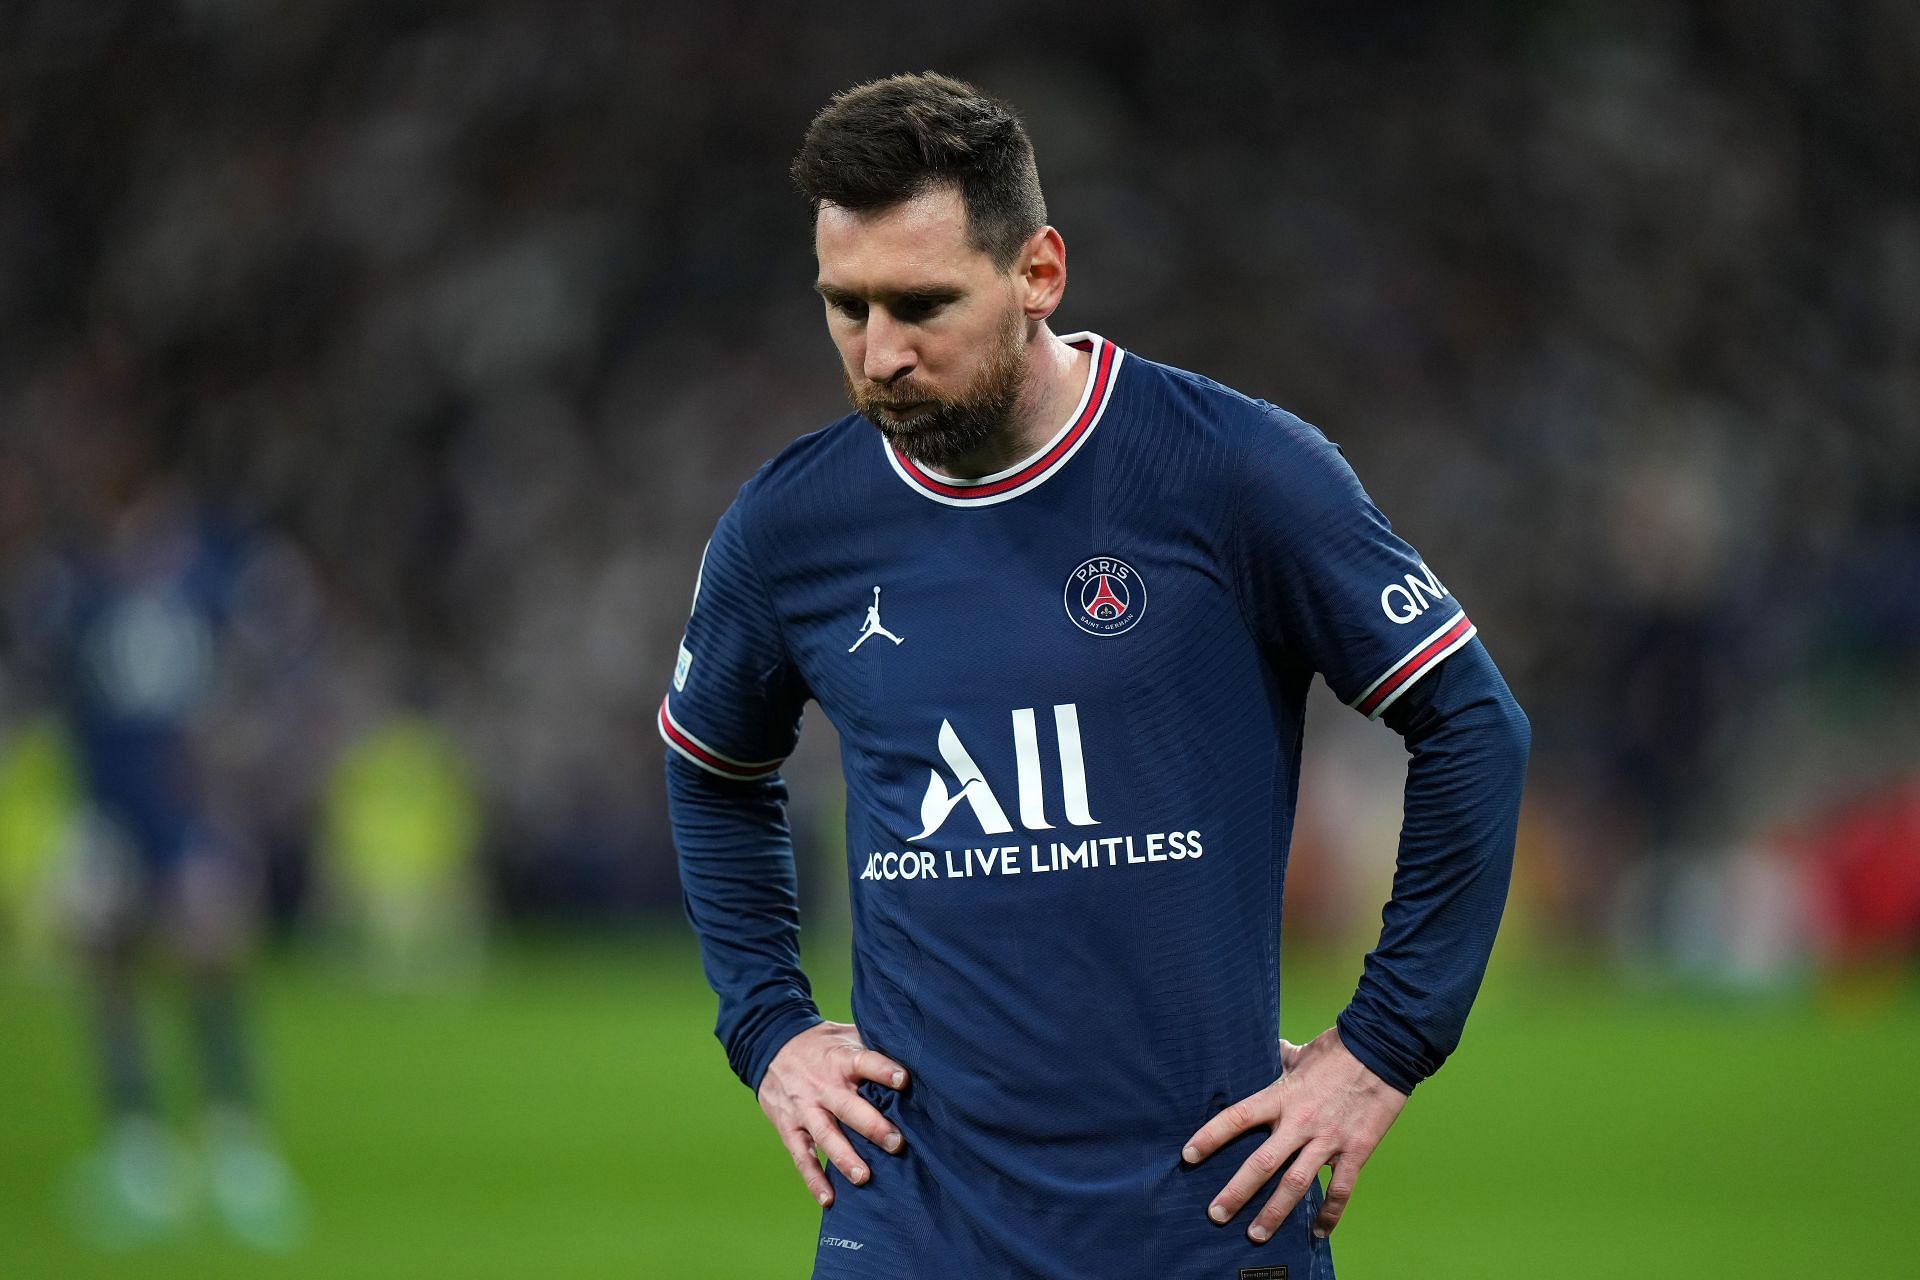 Lionel Messi continues to struggle in Ligue 1.